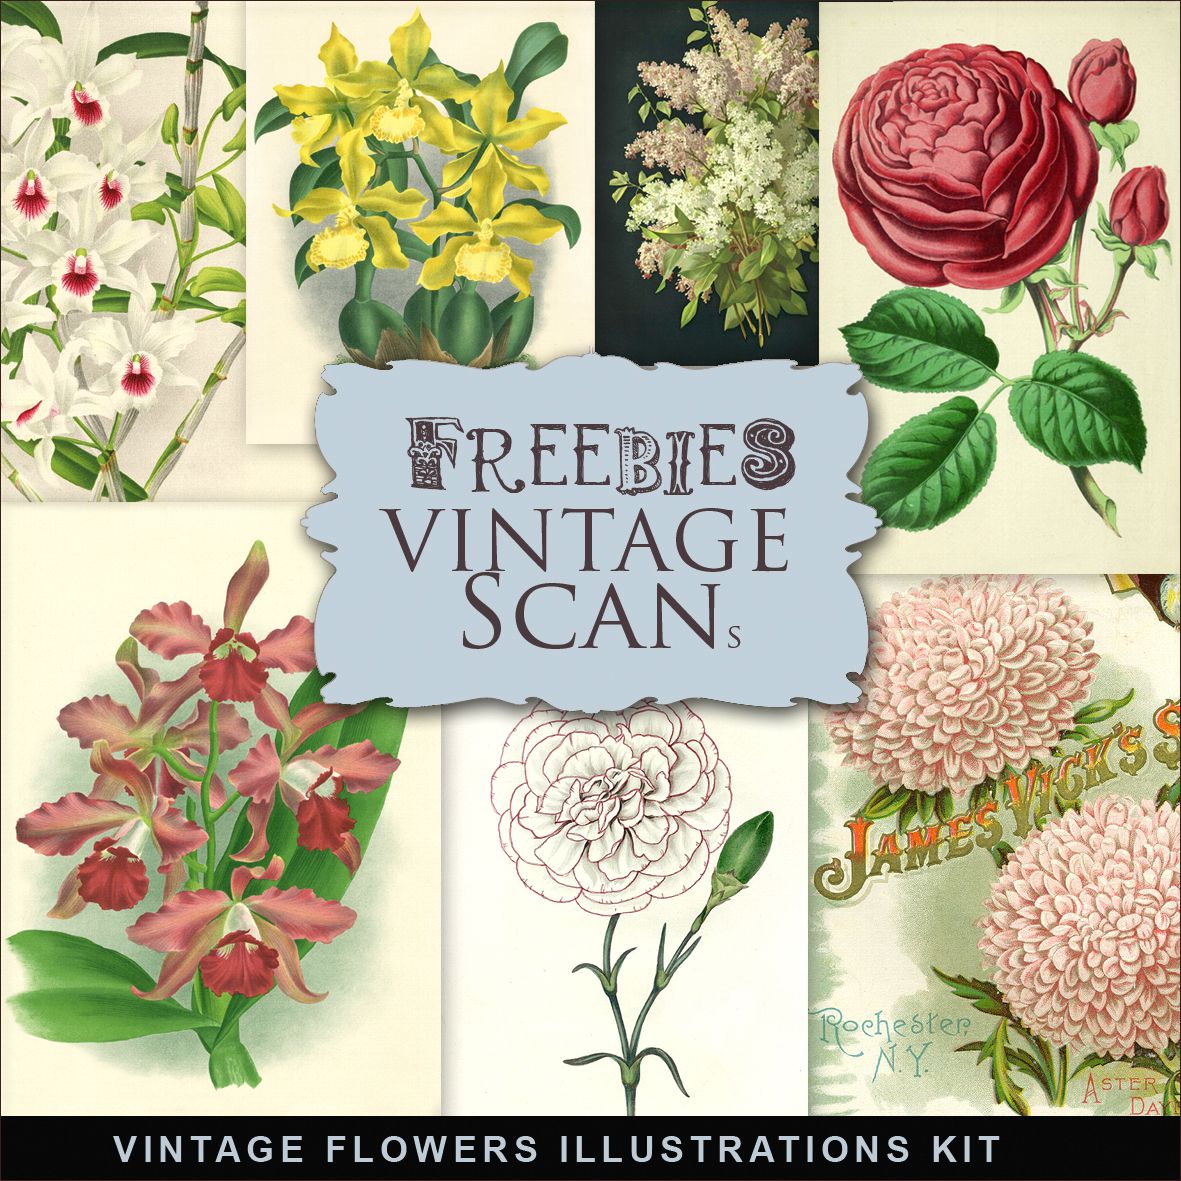 Freebies Kit of Vintage Postcards with Orchids, Freebies, Postcards, Vintage, Flowers, Vintage Orchids, Vintage orchidées, Orchidées, fleurs vintage, Kit de scrapbooking vintage, Scrapbook kit vintage,